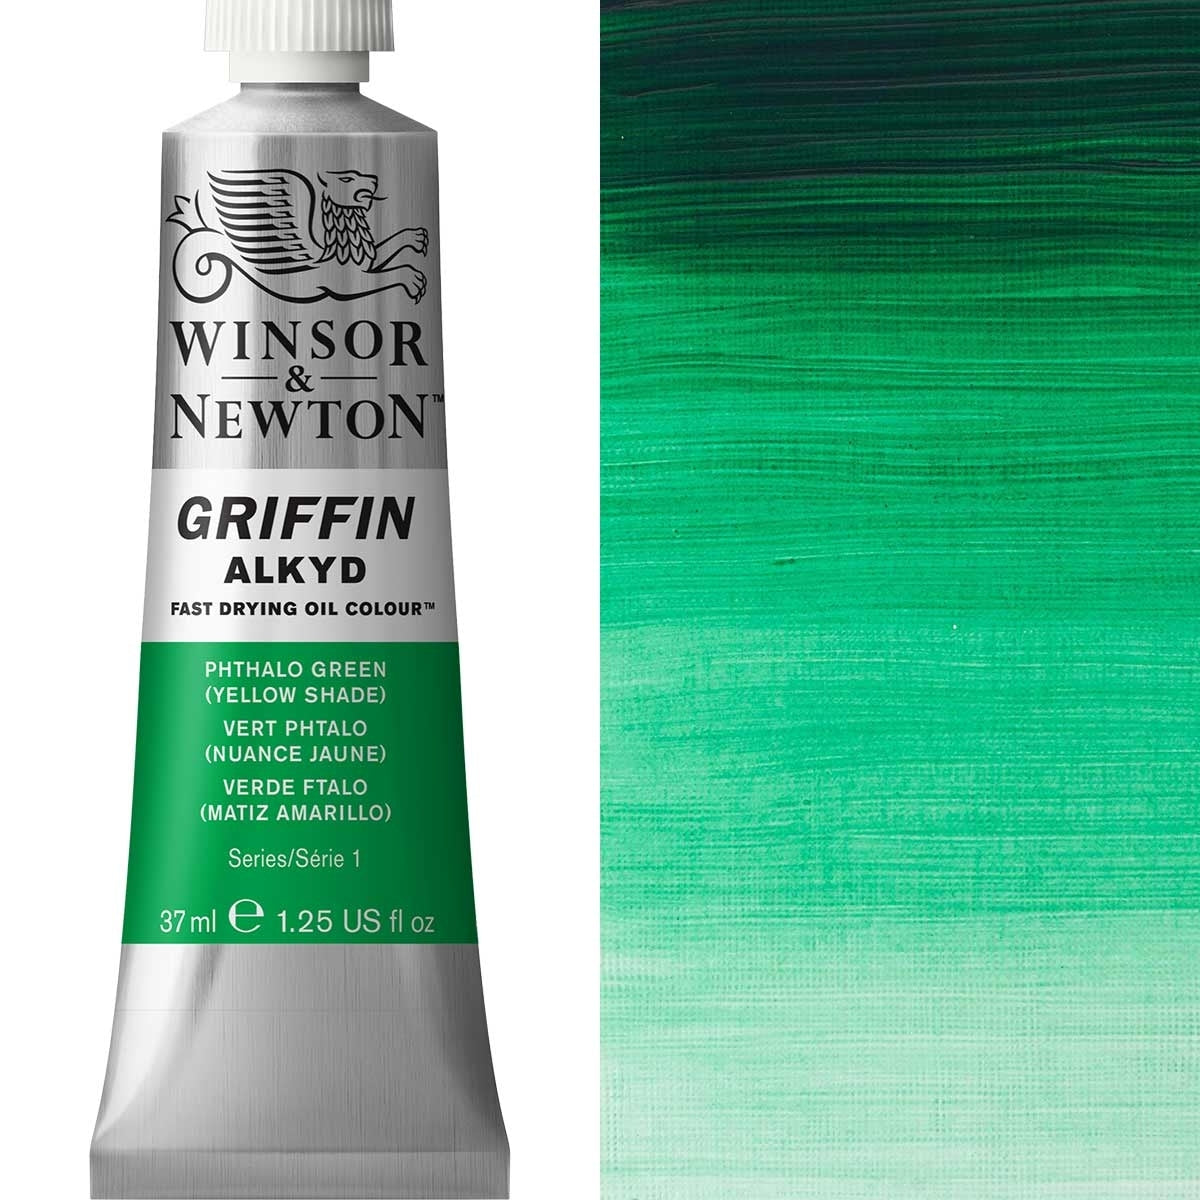 Winsor et Newton - Griffin Alkyd Huile Couleur - 37 ml - Phthalo Green Jaune